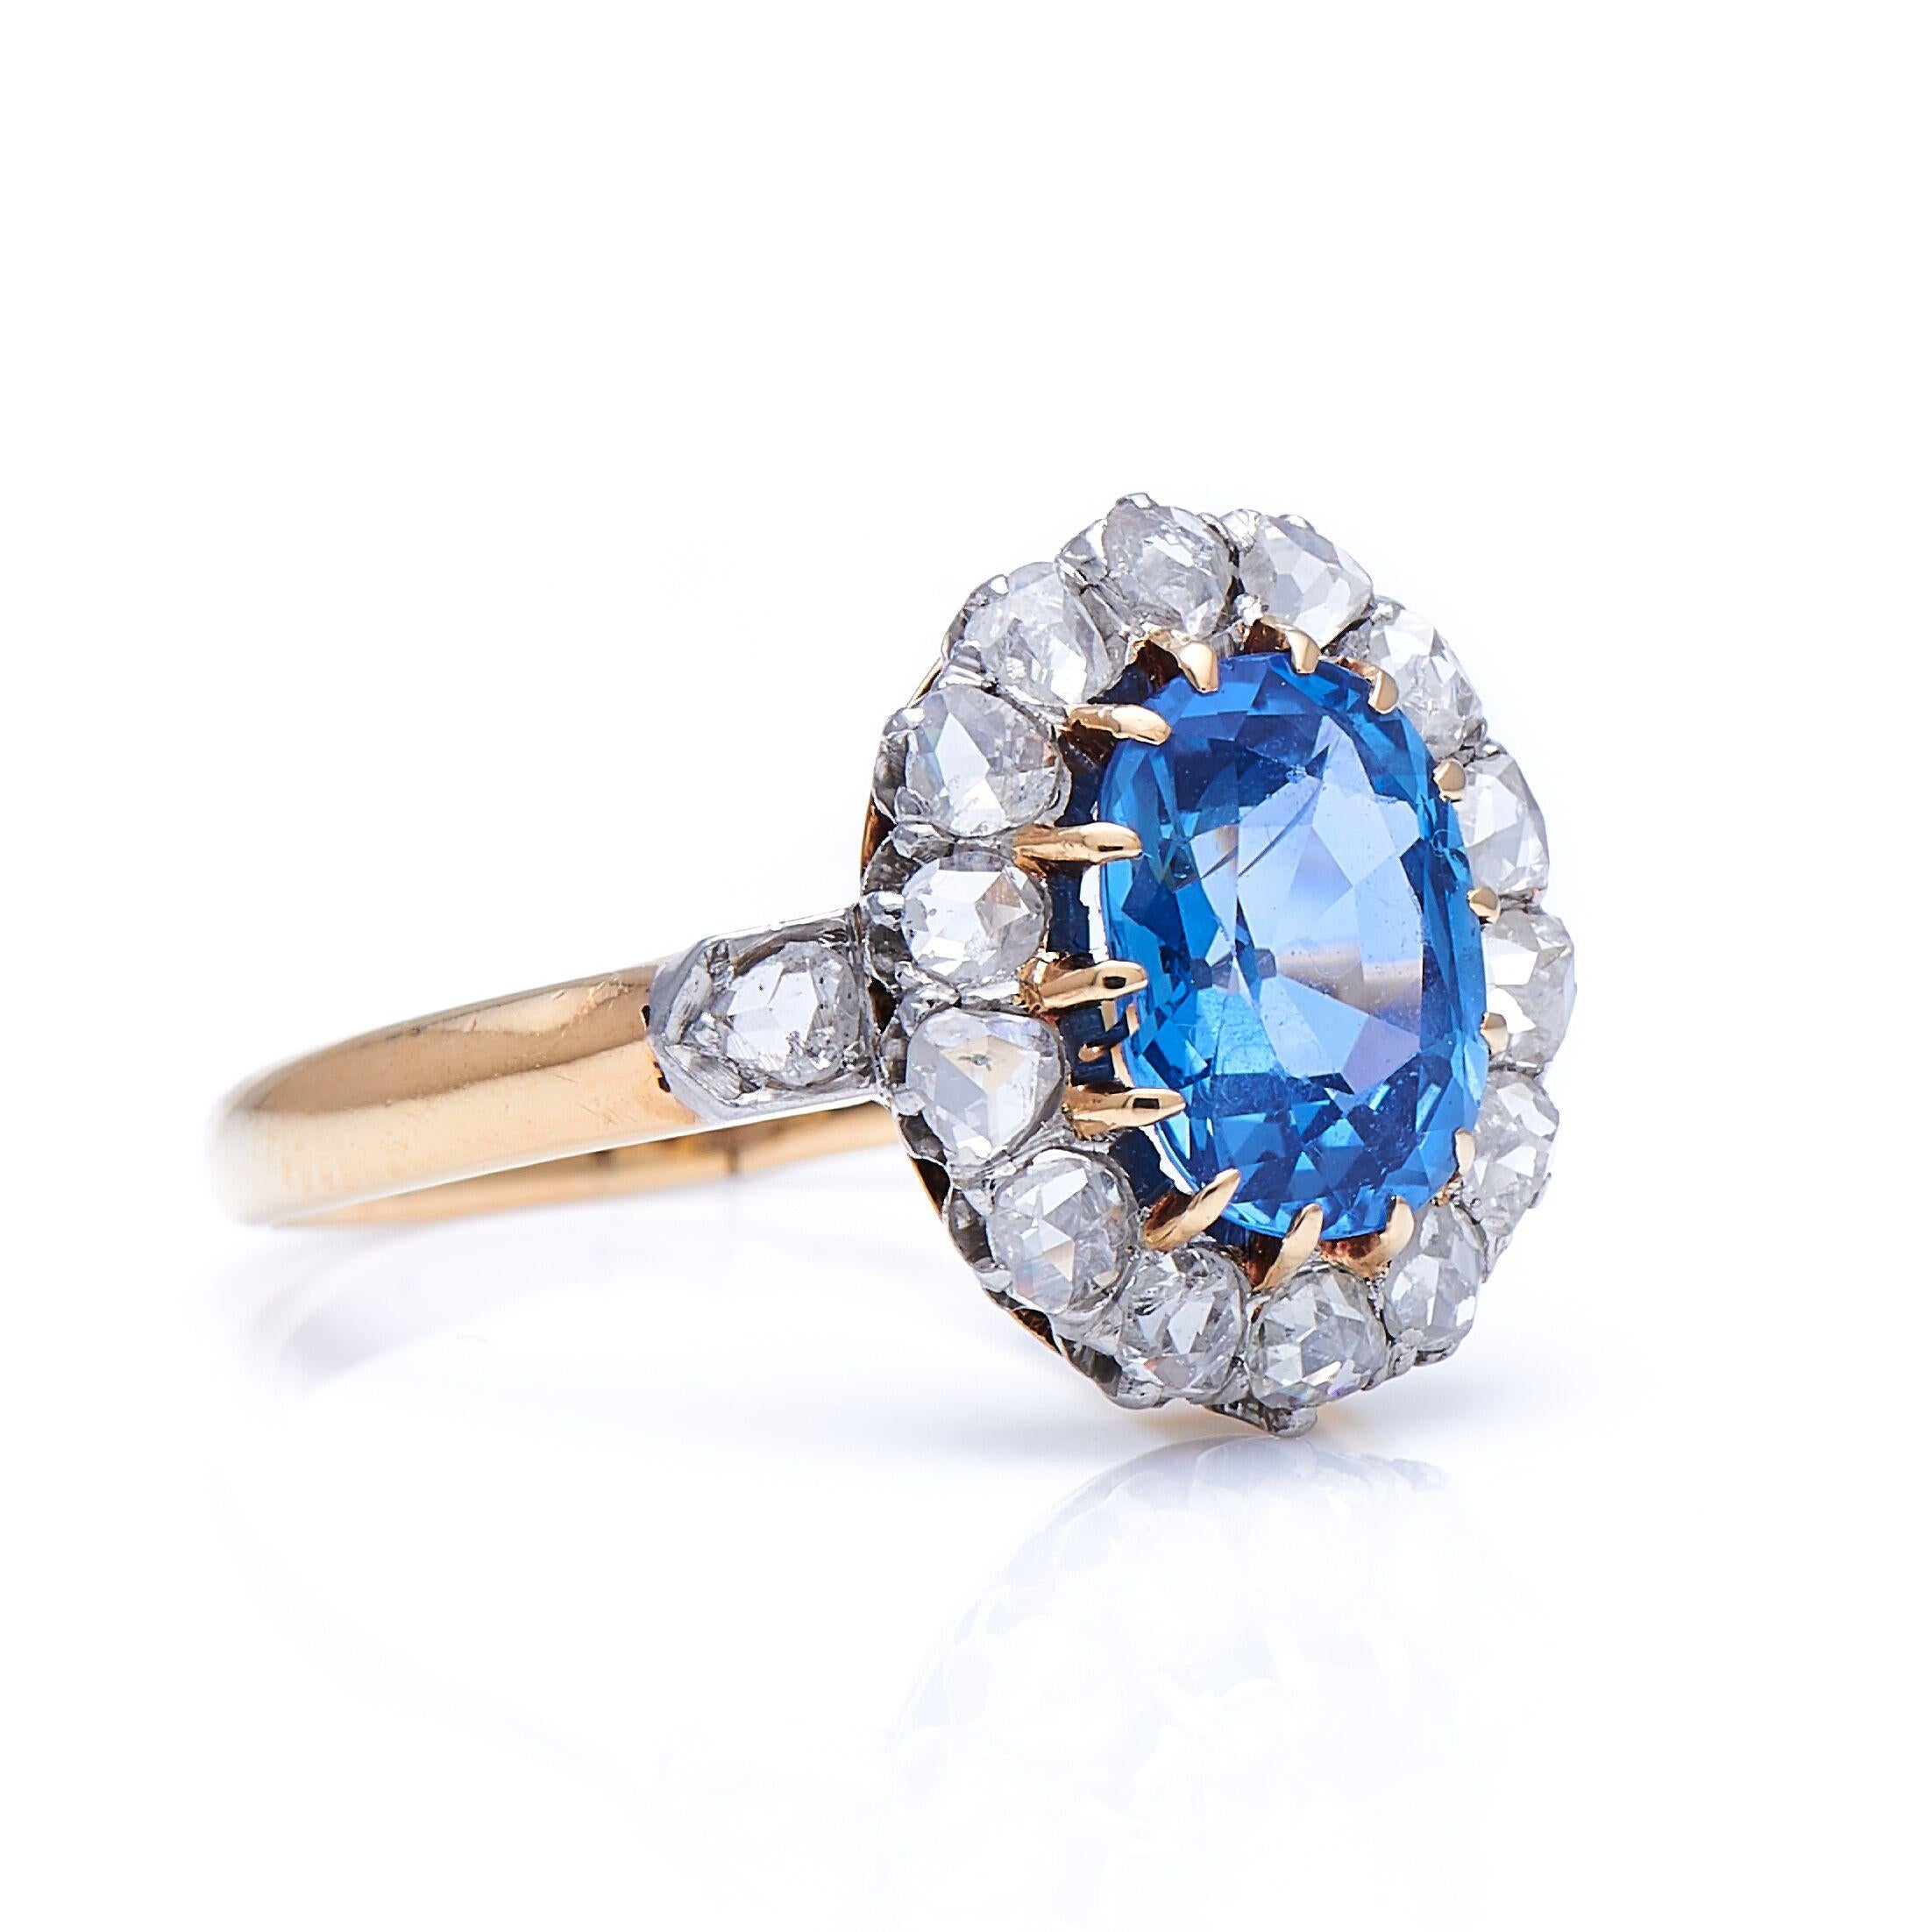 Sapphire and diamond ring, circa 1890. This beautiful sapphire and diamond cluster is claw-set with an untreated Sri Lankan sapphire of beautiful limpidity and a lovely sky blue tone. Unusually, it is surrounded by rose-cut diamonds, which reflect